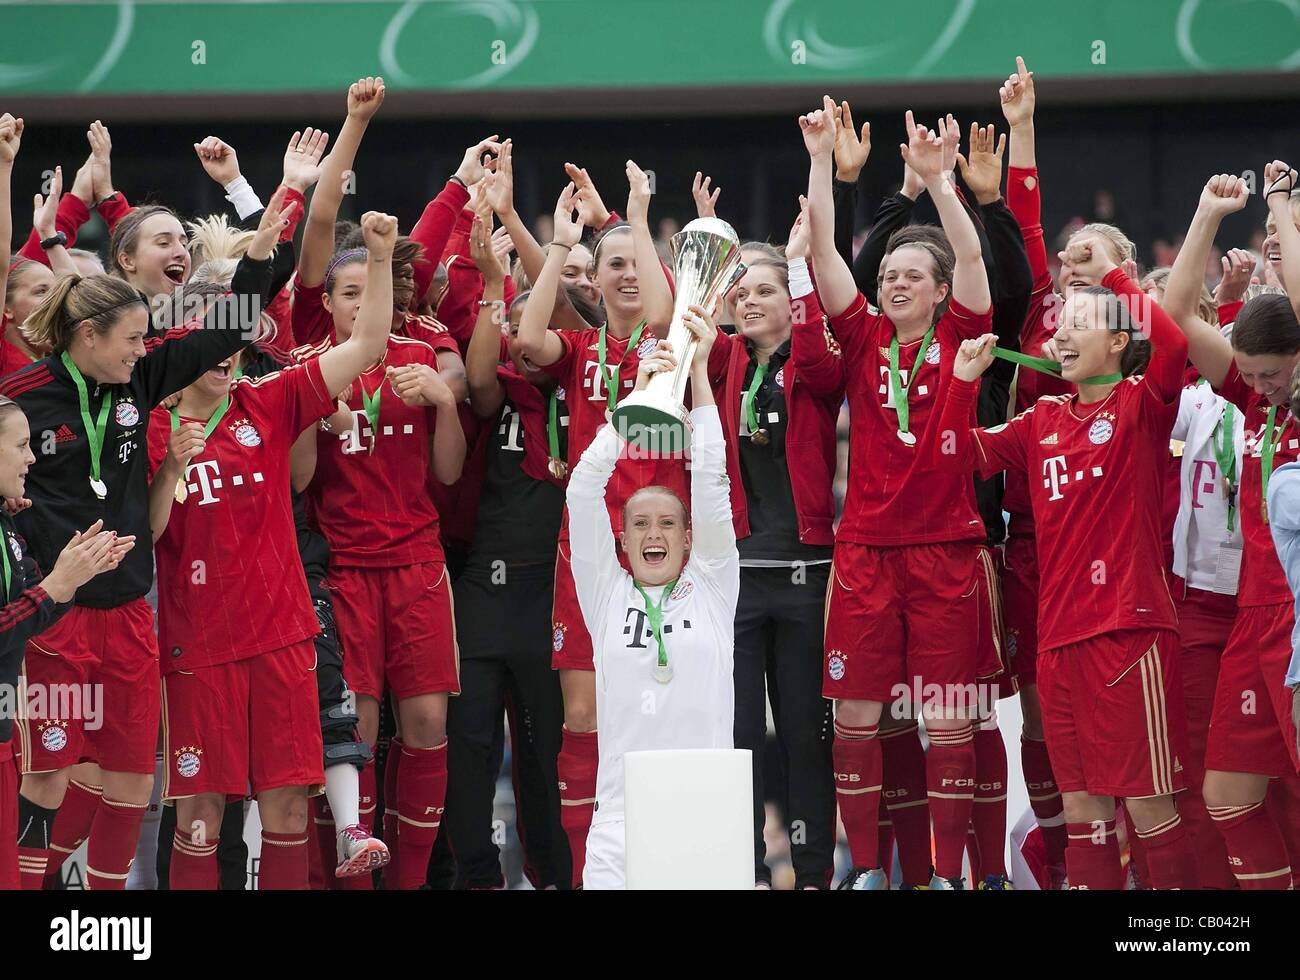 12.05.2012. Cologne, Germany. German womens Cup Final FFC Frankfurt vs FC Bayern Munich  Goalkeeper Kathrin Langert cheering with the Cup in Team photo Stock Photo